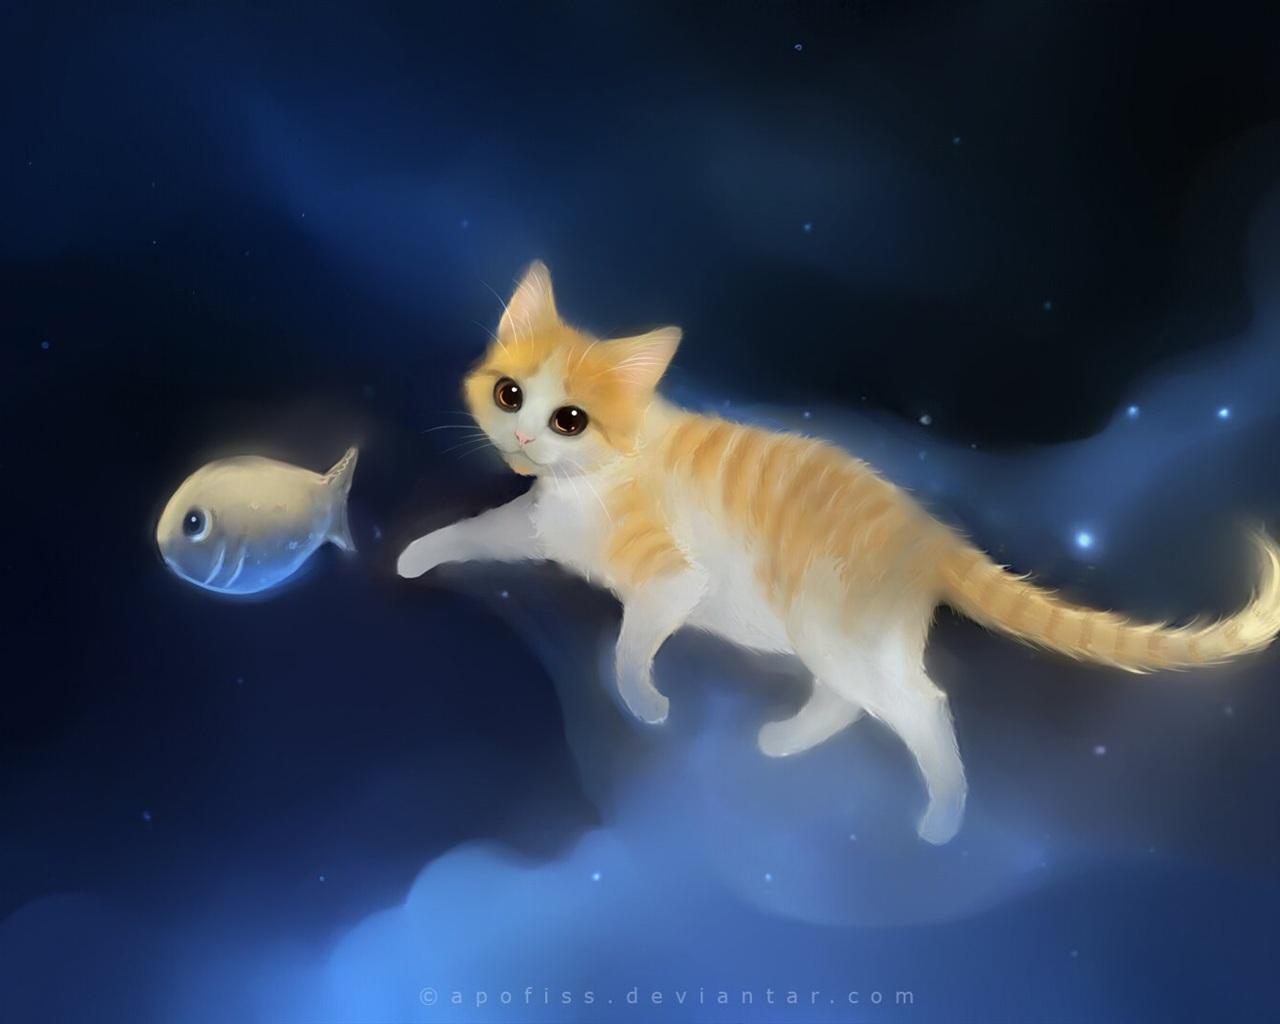 Wallpaper Cat chasing fish in the sky of painting 1920x1080 Full HD